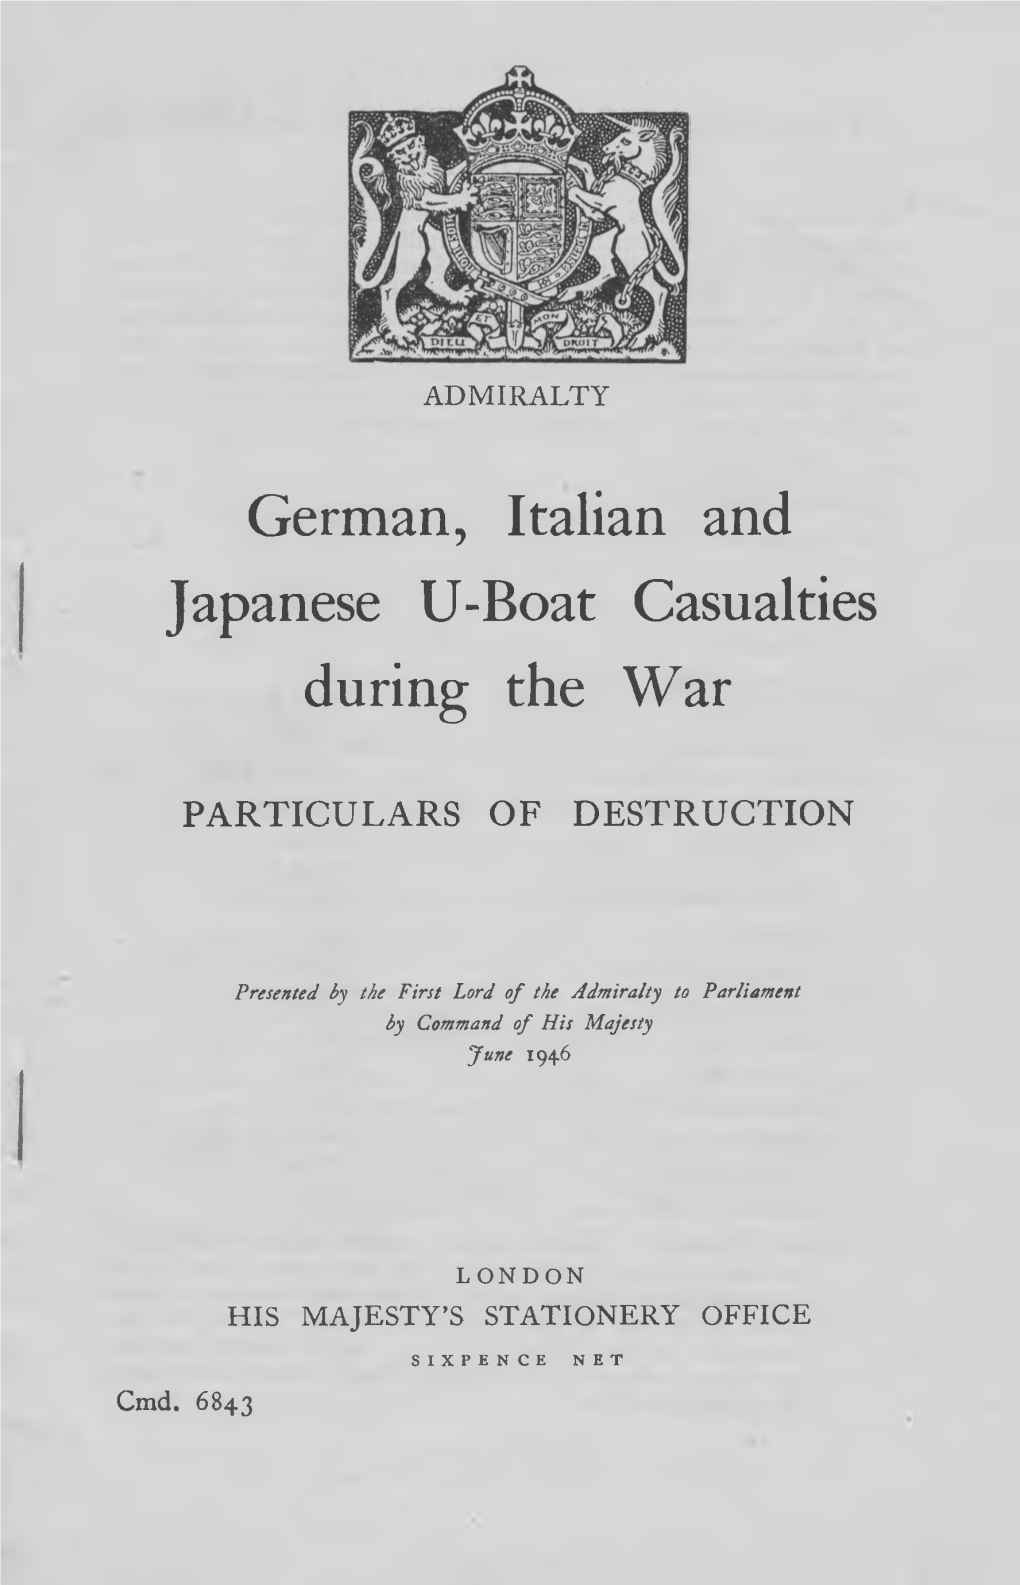 German, Italian and Japanese U-Boat Casualties During the War